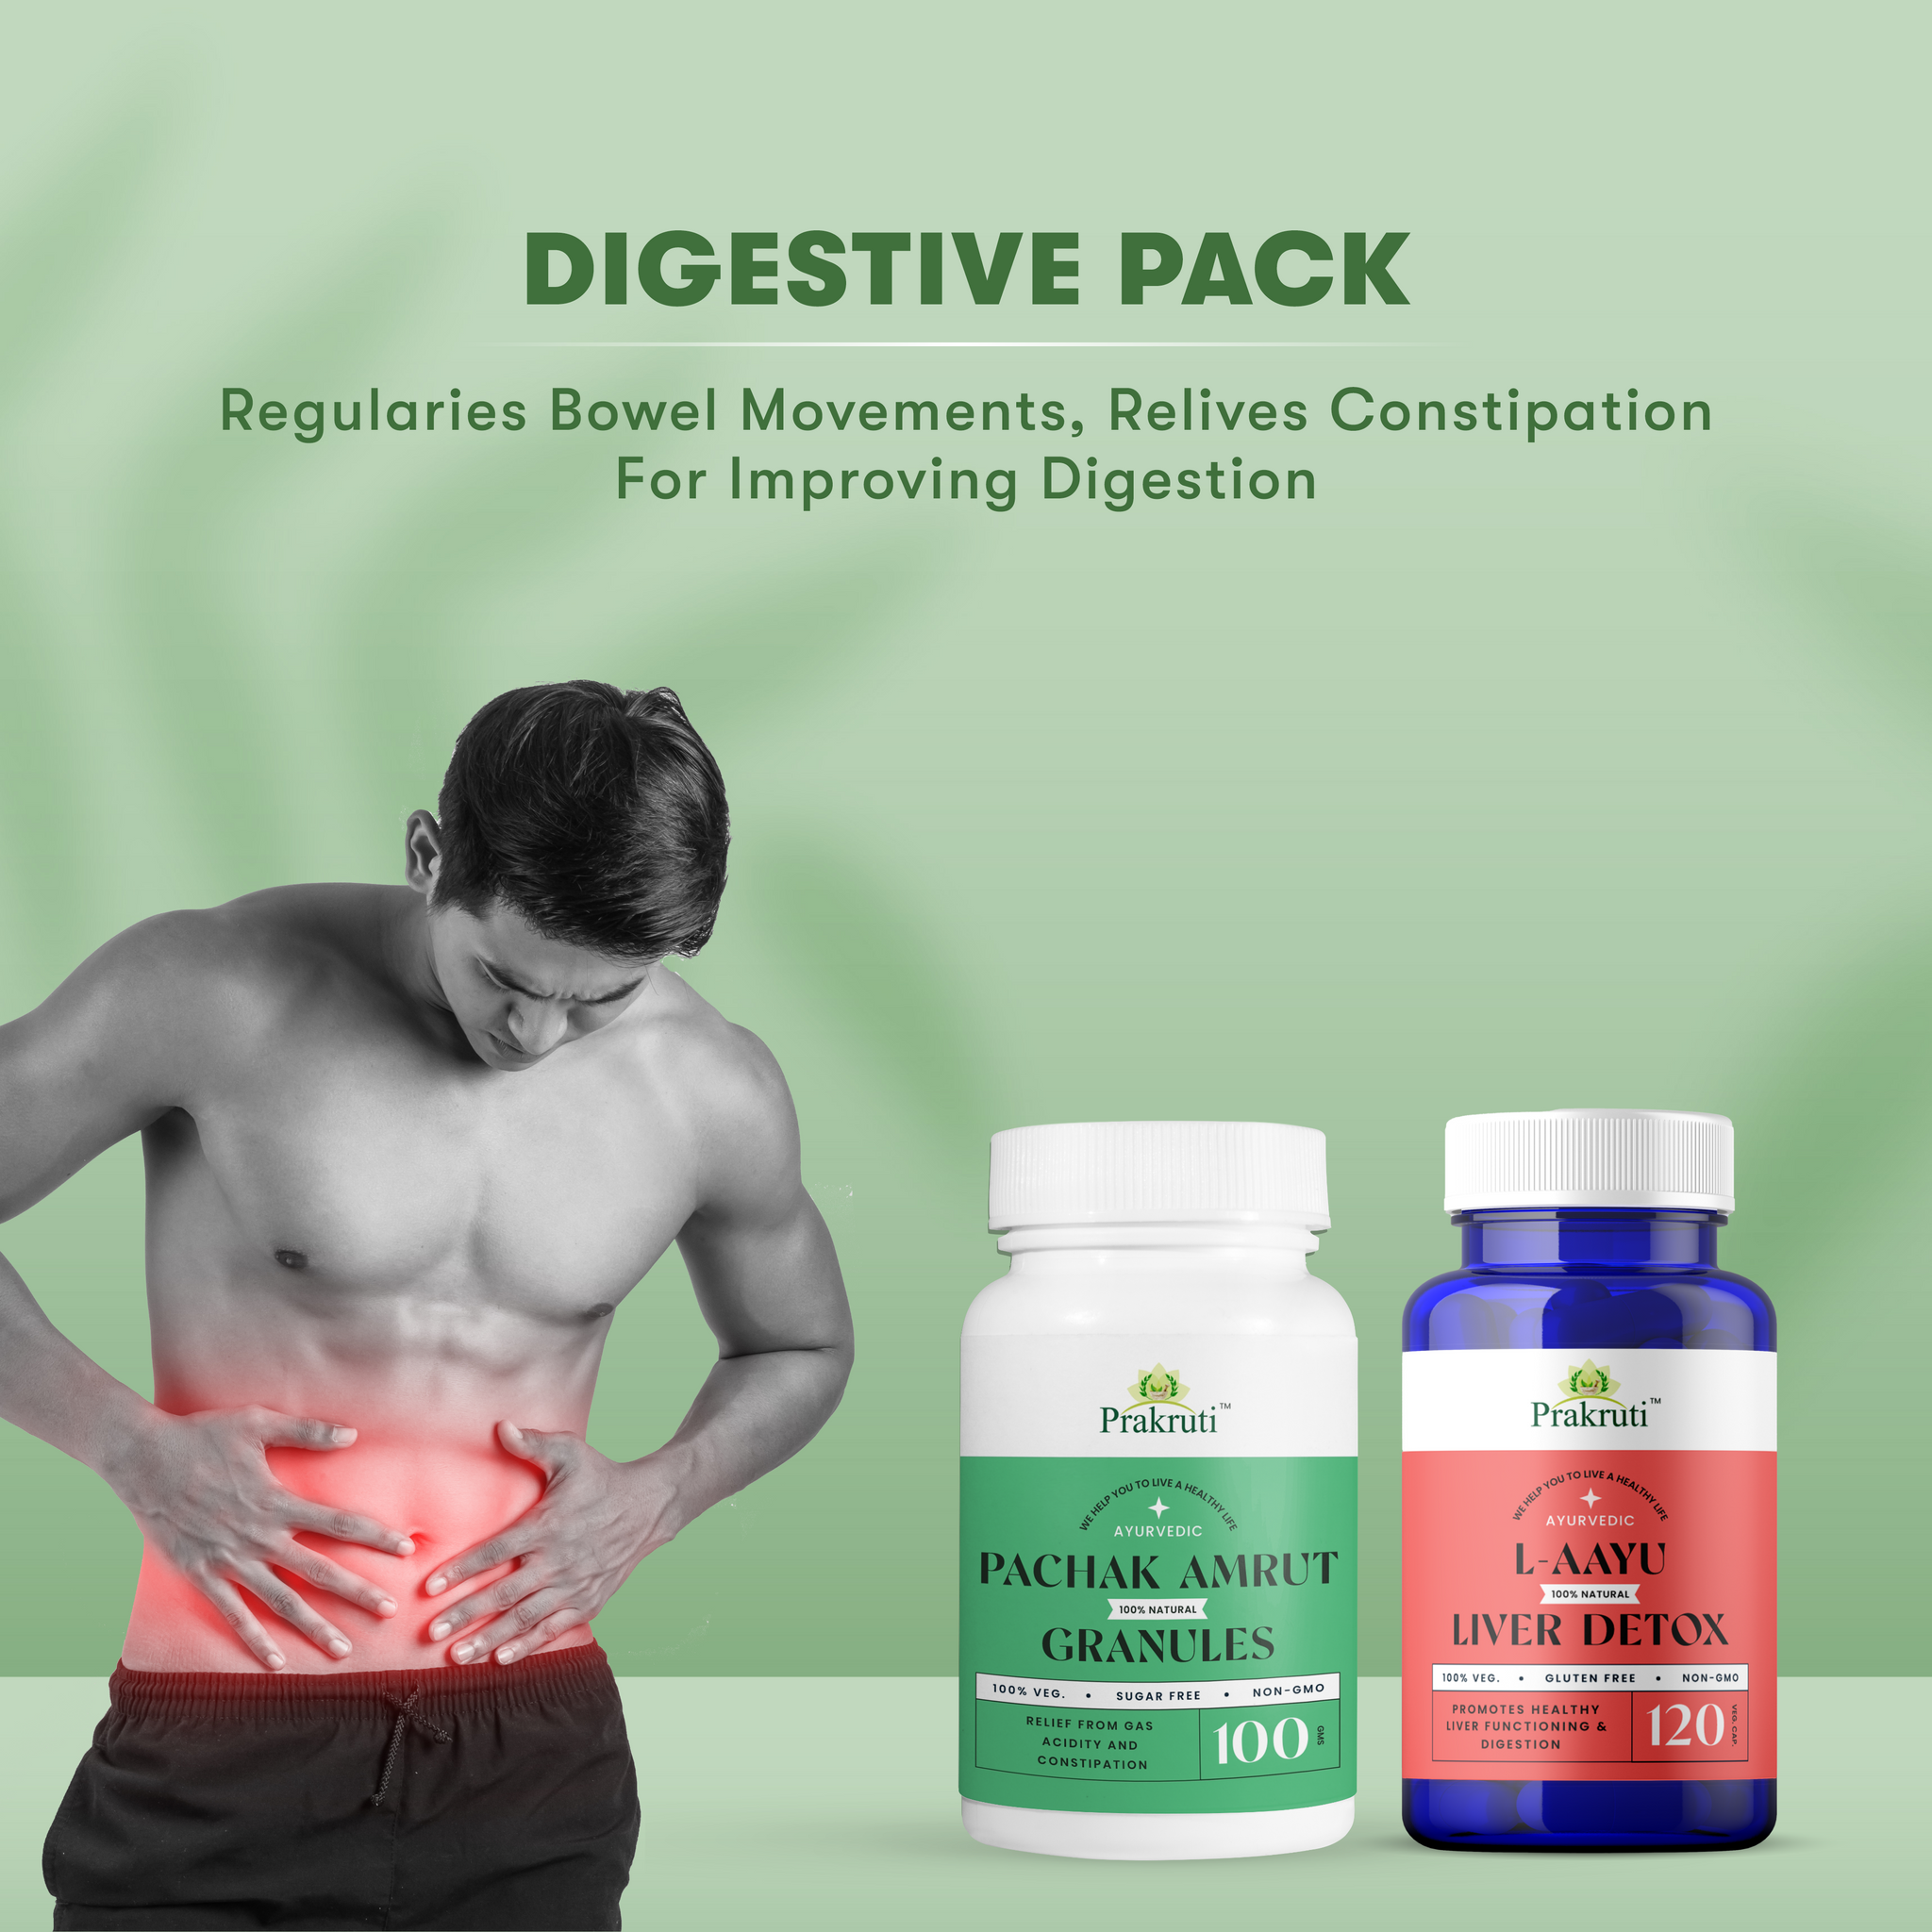 Ayurvedic Digestive Pack for Digestion, Gas, Bloating, Constipation Relief and Liver Health